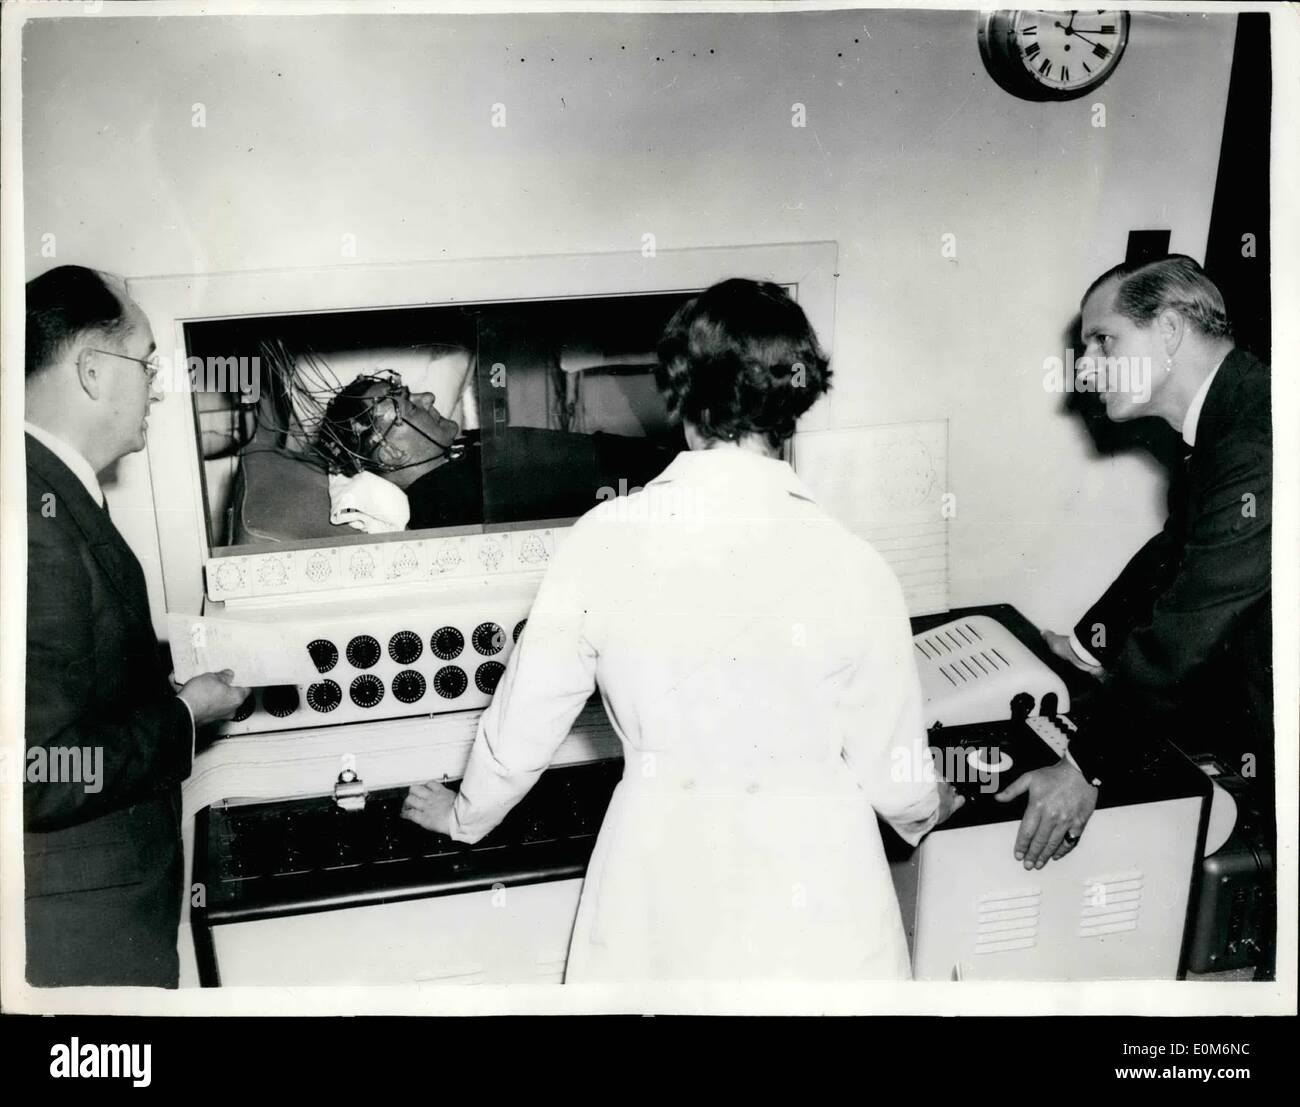 Oct. 28, 1953 - The Duke Of Edinburgh Visits Mental Hospital: When H.R.H. The Duke of Edinburgh visited the Goodmayes Mental Hospital at lford, Essex, this morning - he inspected the E.E.G. Machine the Ediwan 8-Channel Electra-Encephalograph (Mark II) and electronic apparatus for recording the Electrical activity of the human brain. Stock Photo